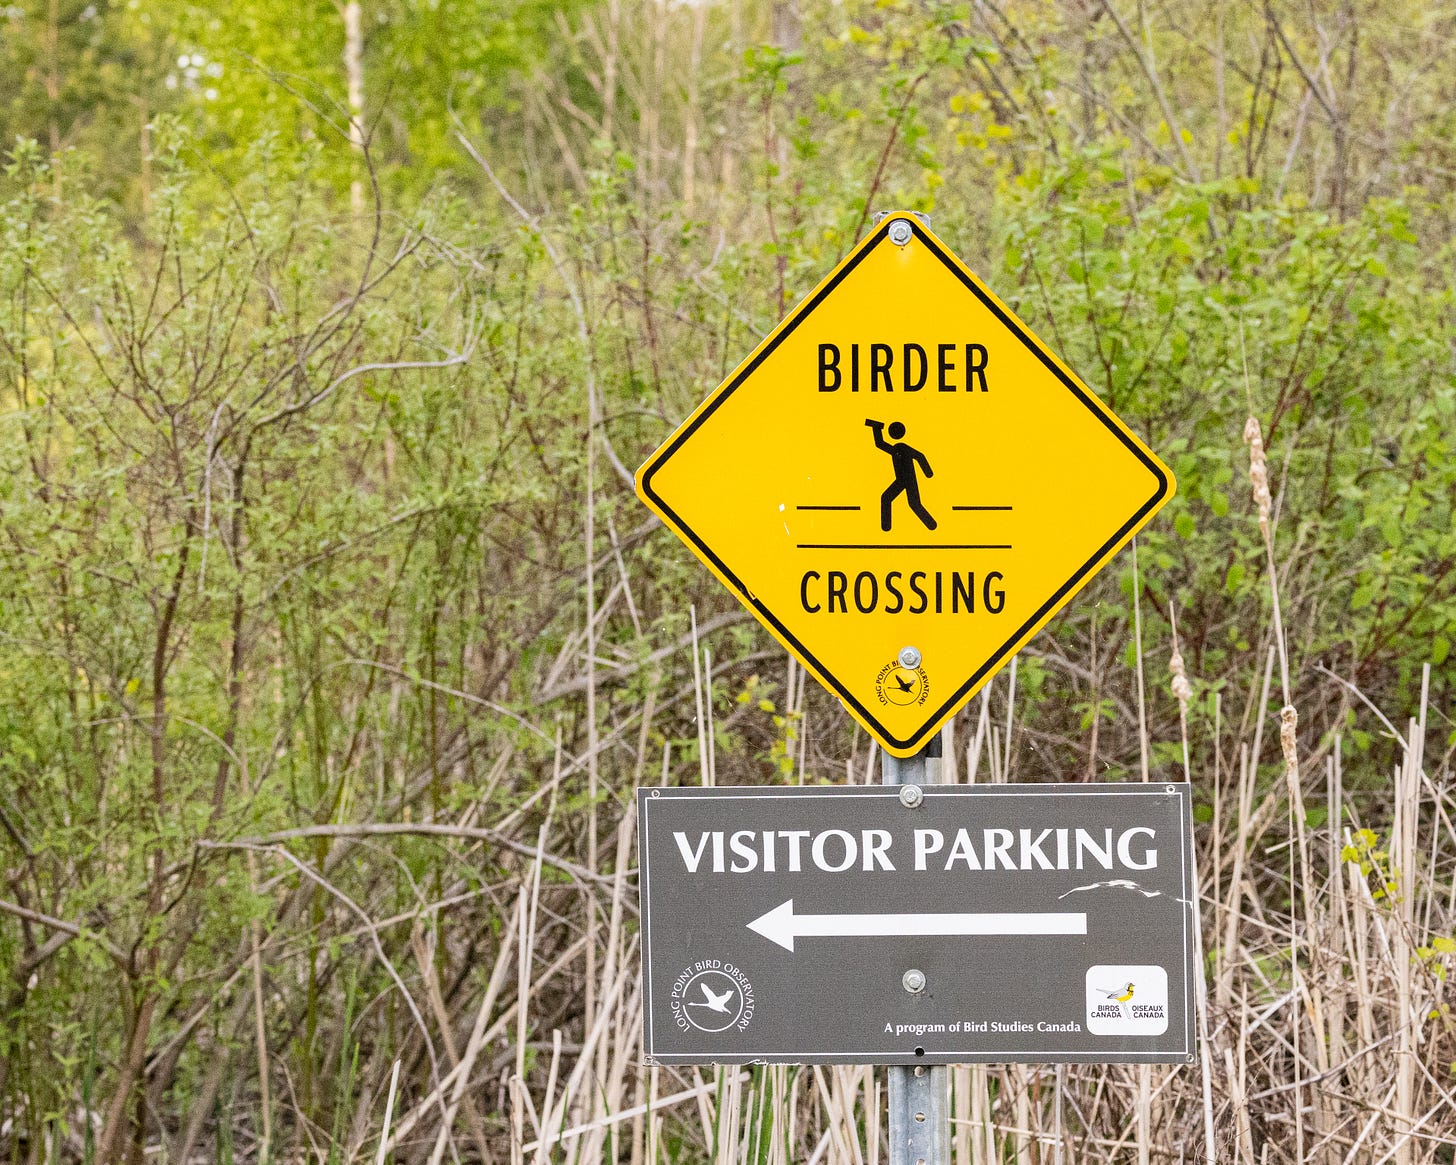 This image shows a street sign with the words "Birder Crossing" and an icon of a person walking across the road with binoculars. There is also a Visitor Parking sign below it.